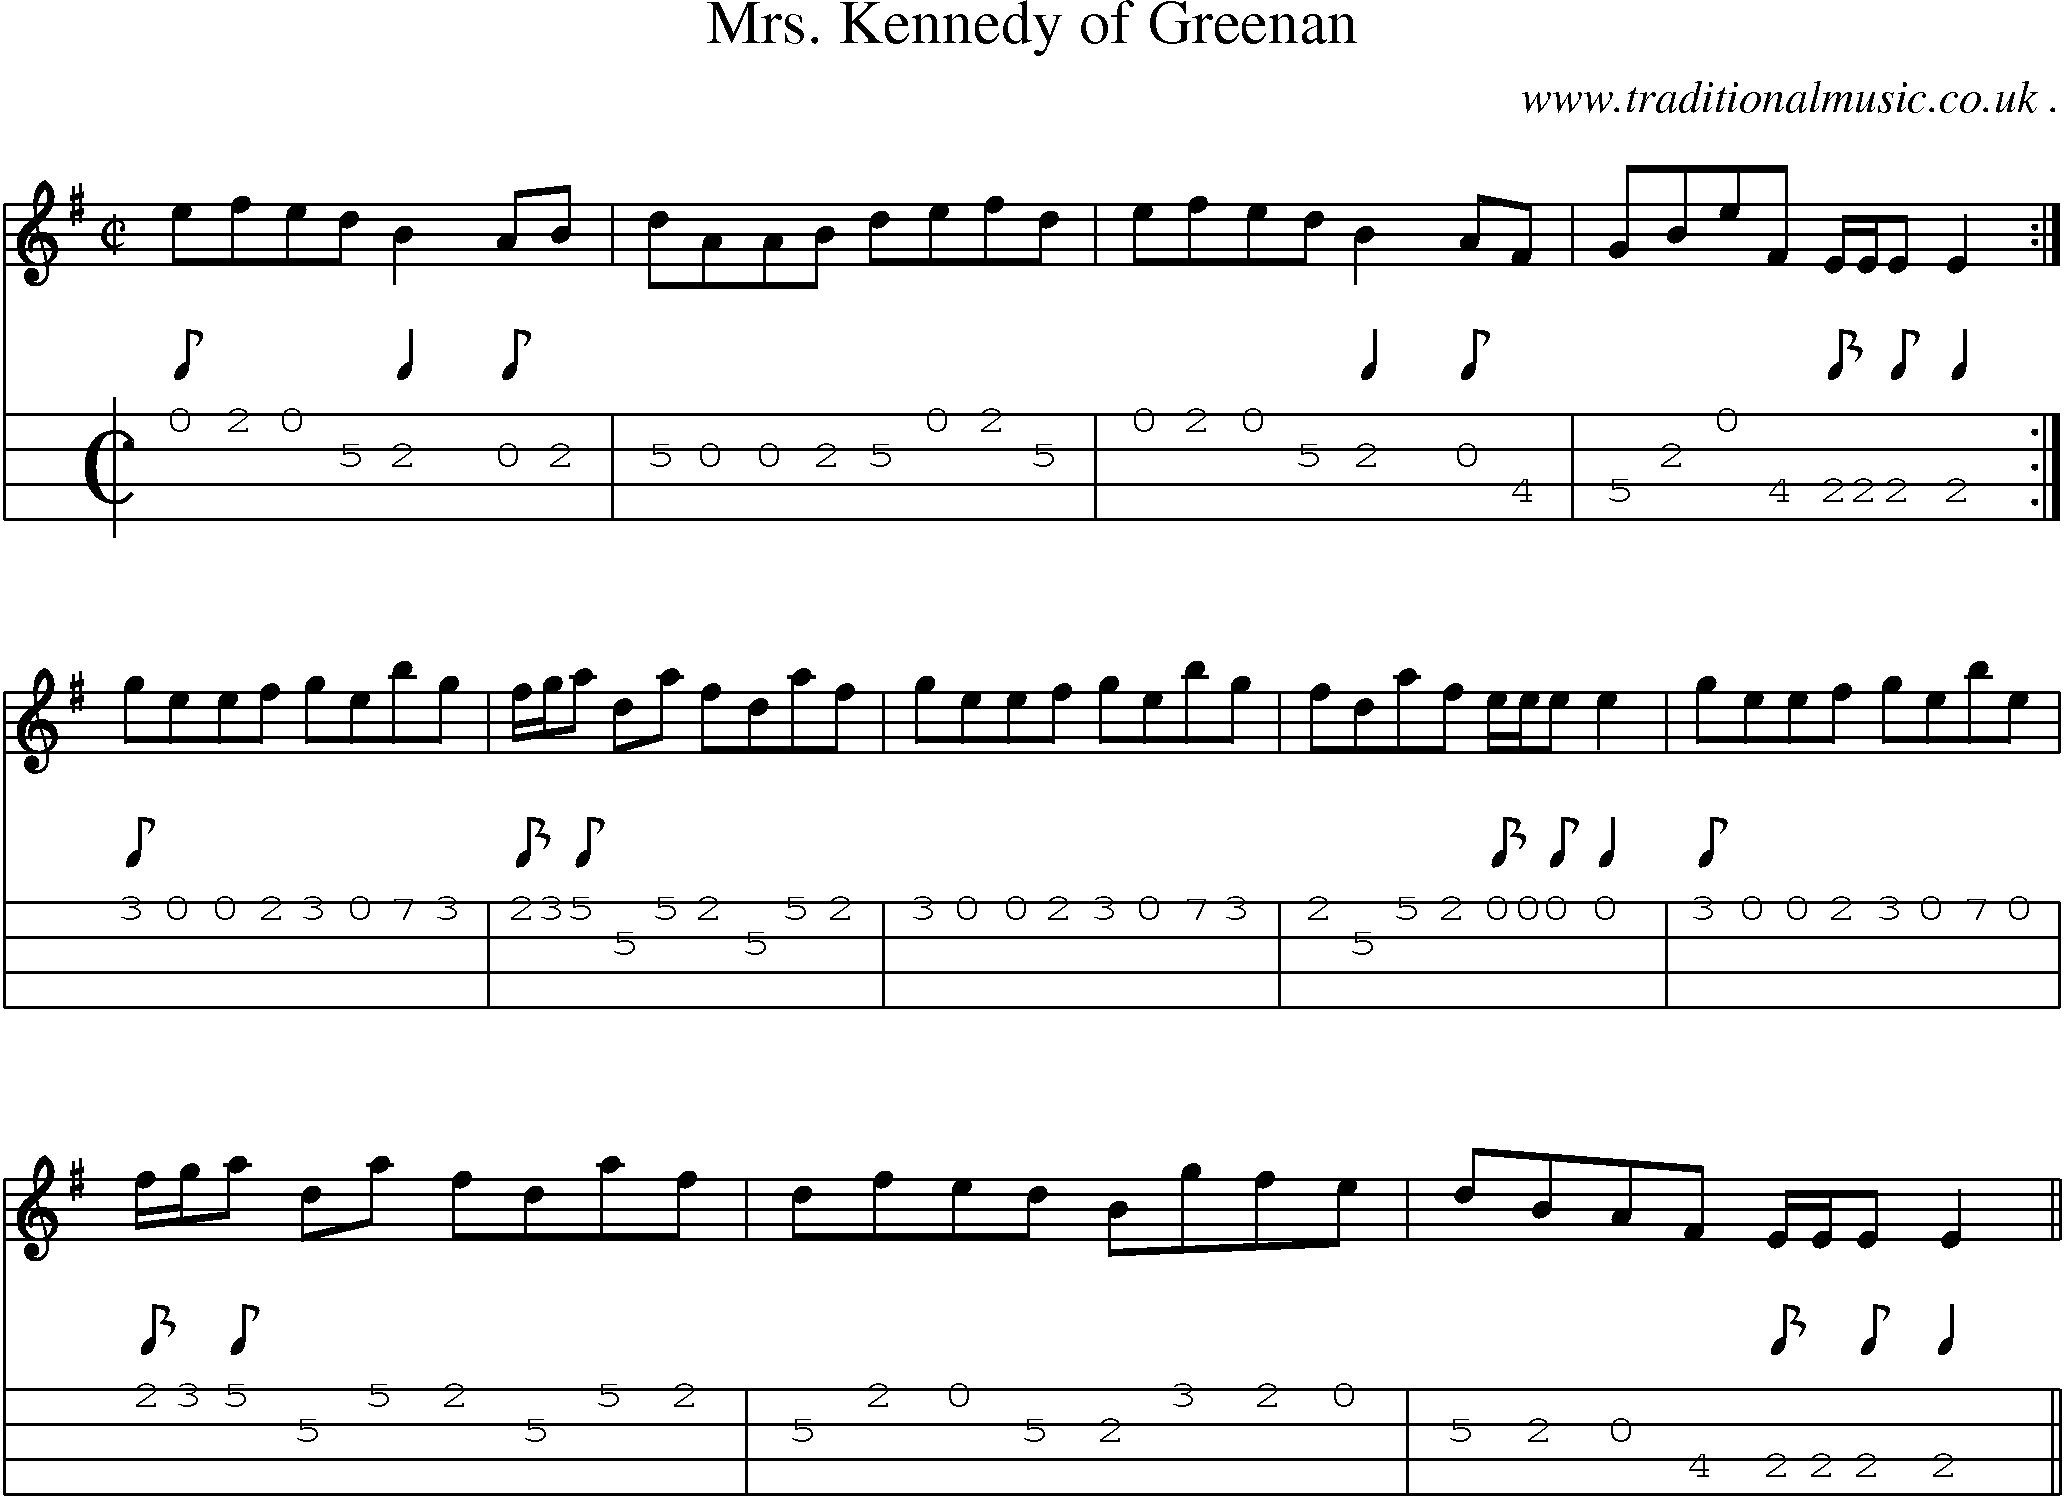 Sheet-music  score, Chords and Mandolin Tabs for Mrs Kennedy Of Greenan